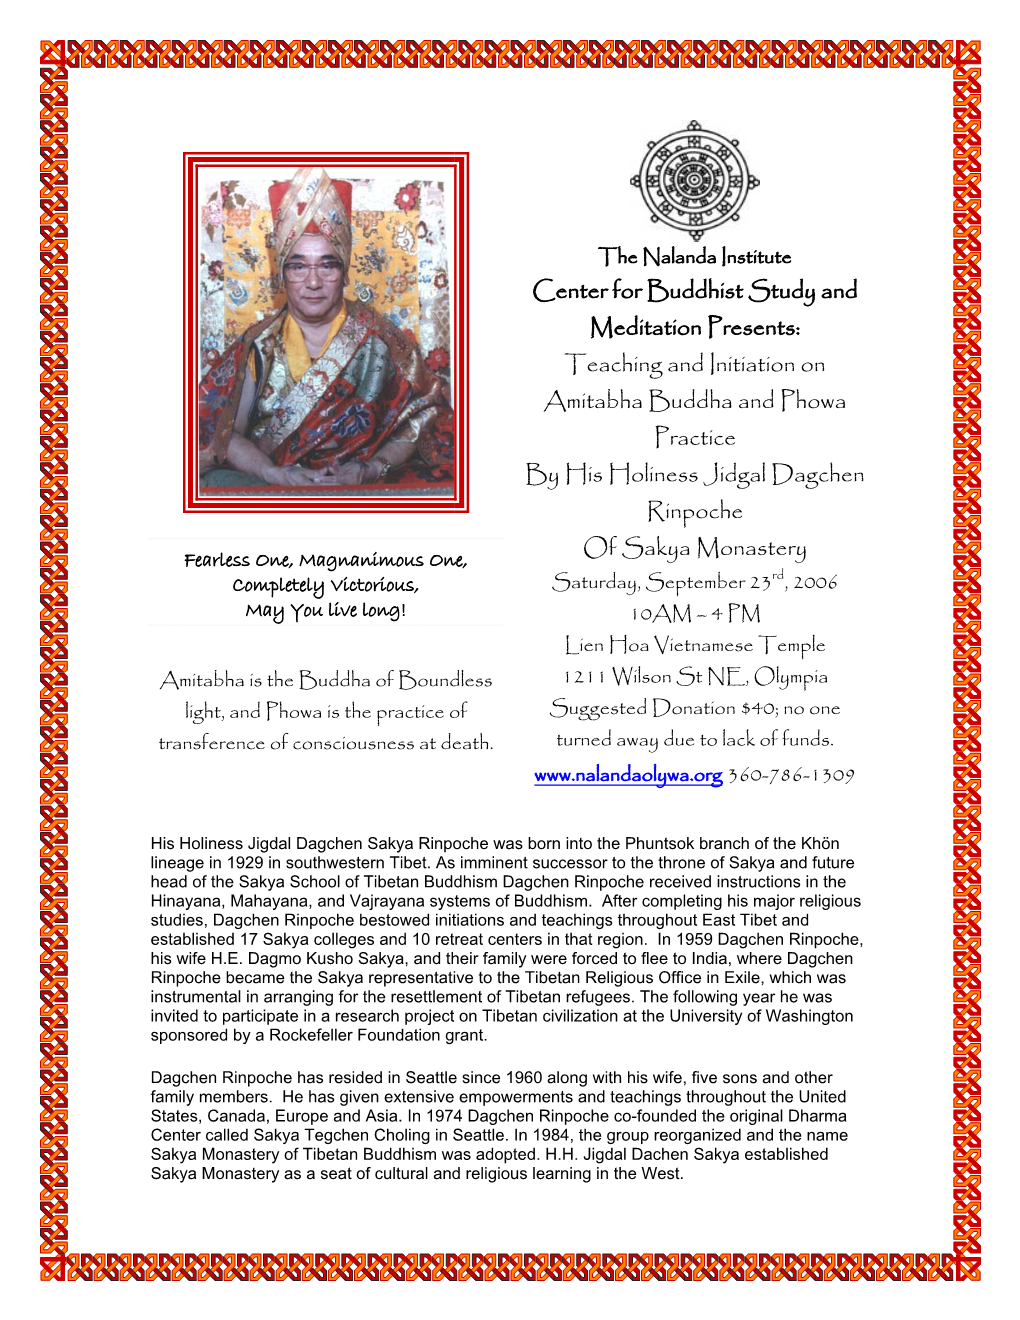 Teaching and Initiation on Amitabha Buddha and Phowa Practice by His Holiness Jidgal Dagchen